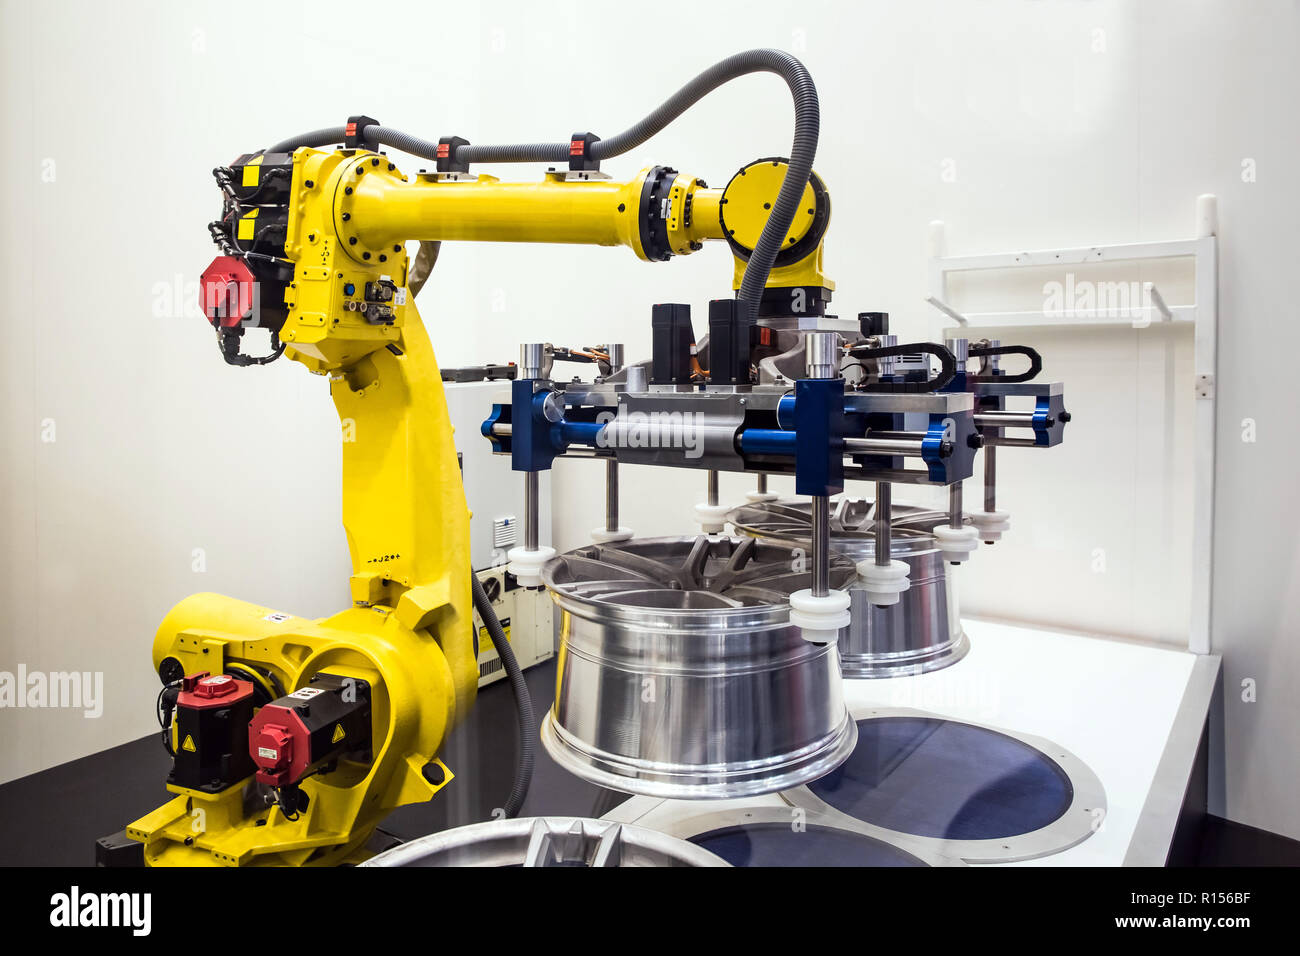 Automatic Industrial Robot, auto service working process Stock Photo